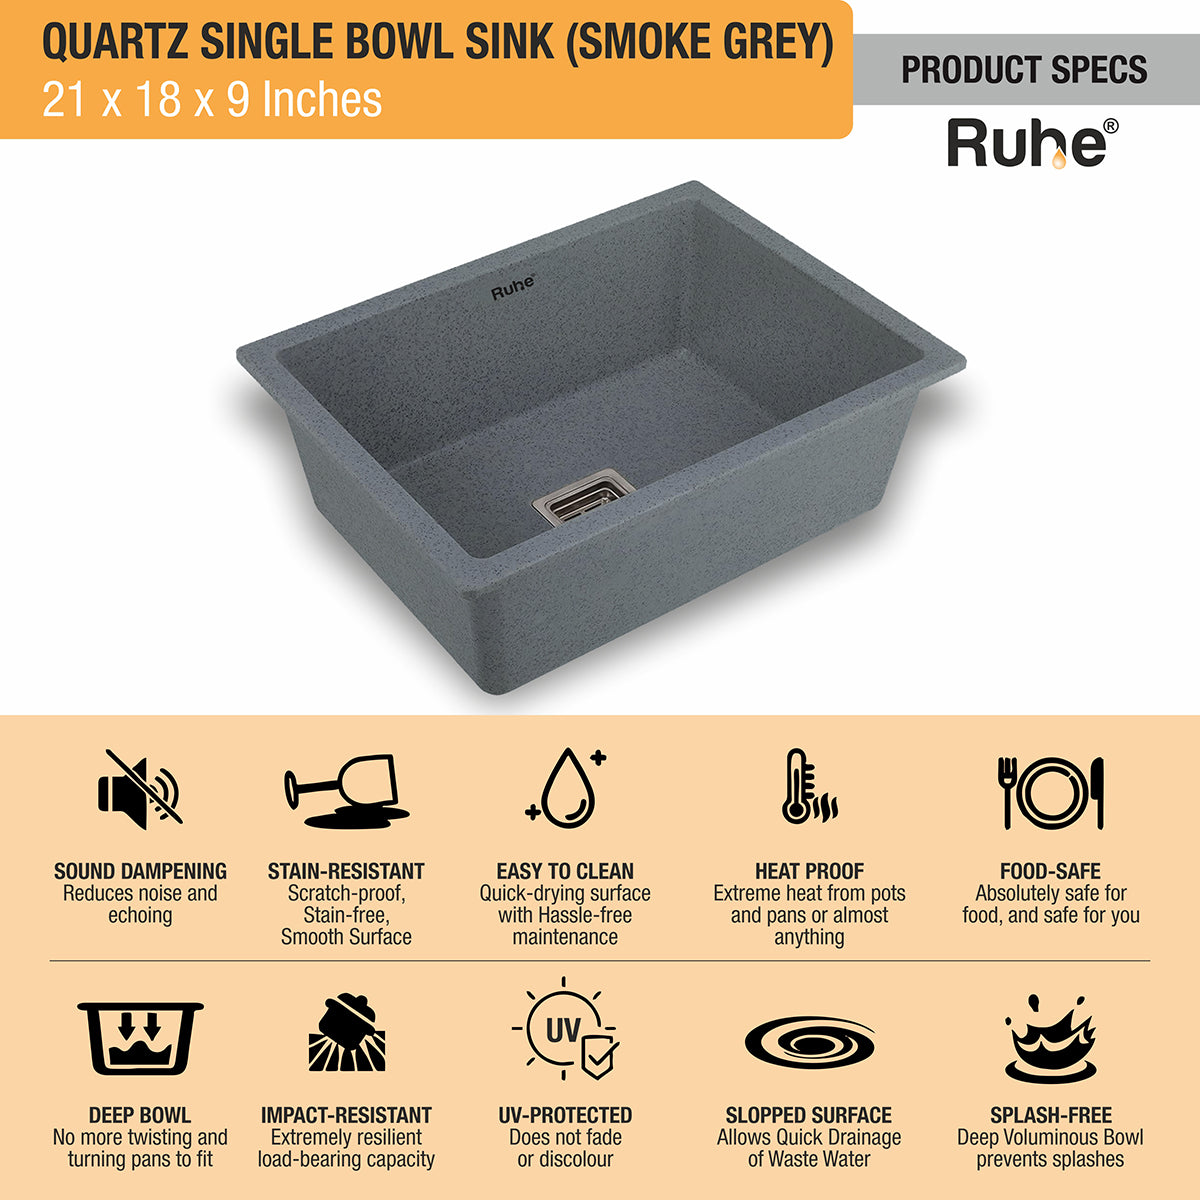 Quartz Smoke Grey Single Bowl Kitchen Sink (21 x 18 x 9 inches) features and benefits